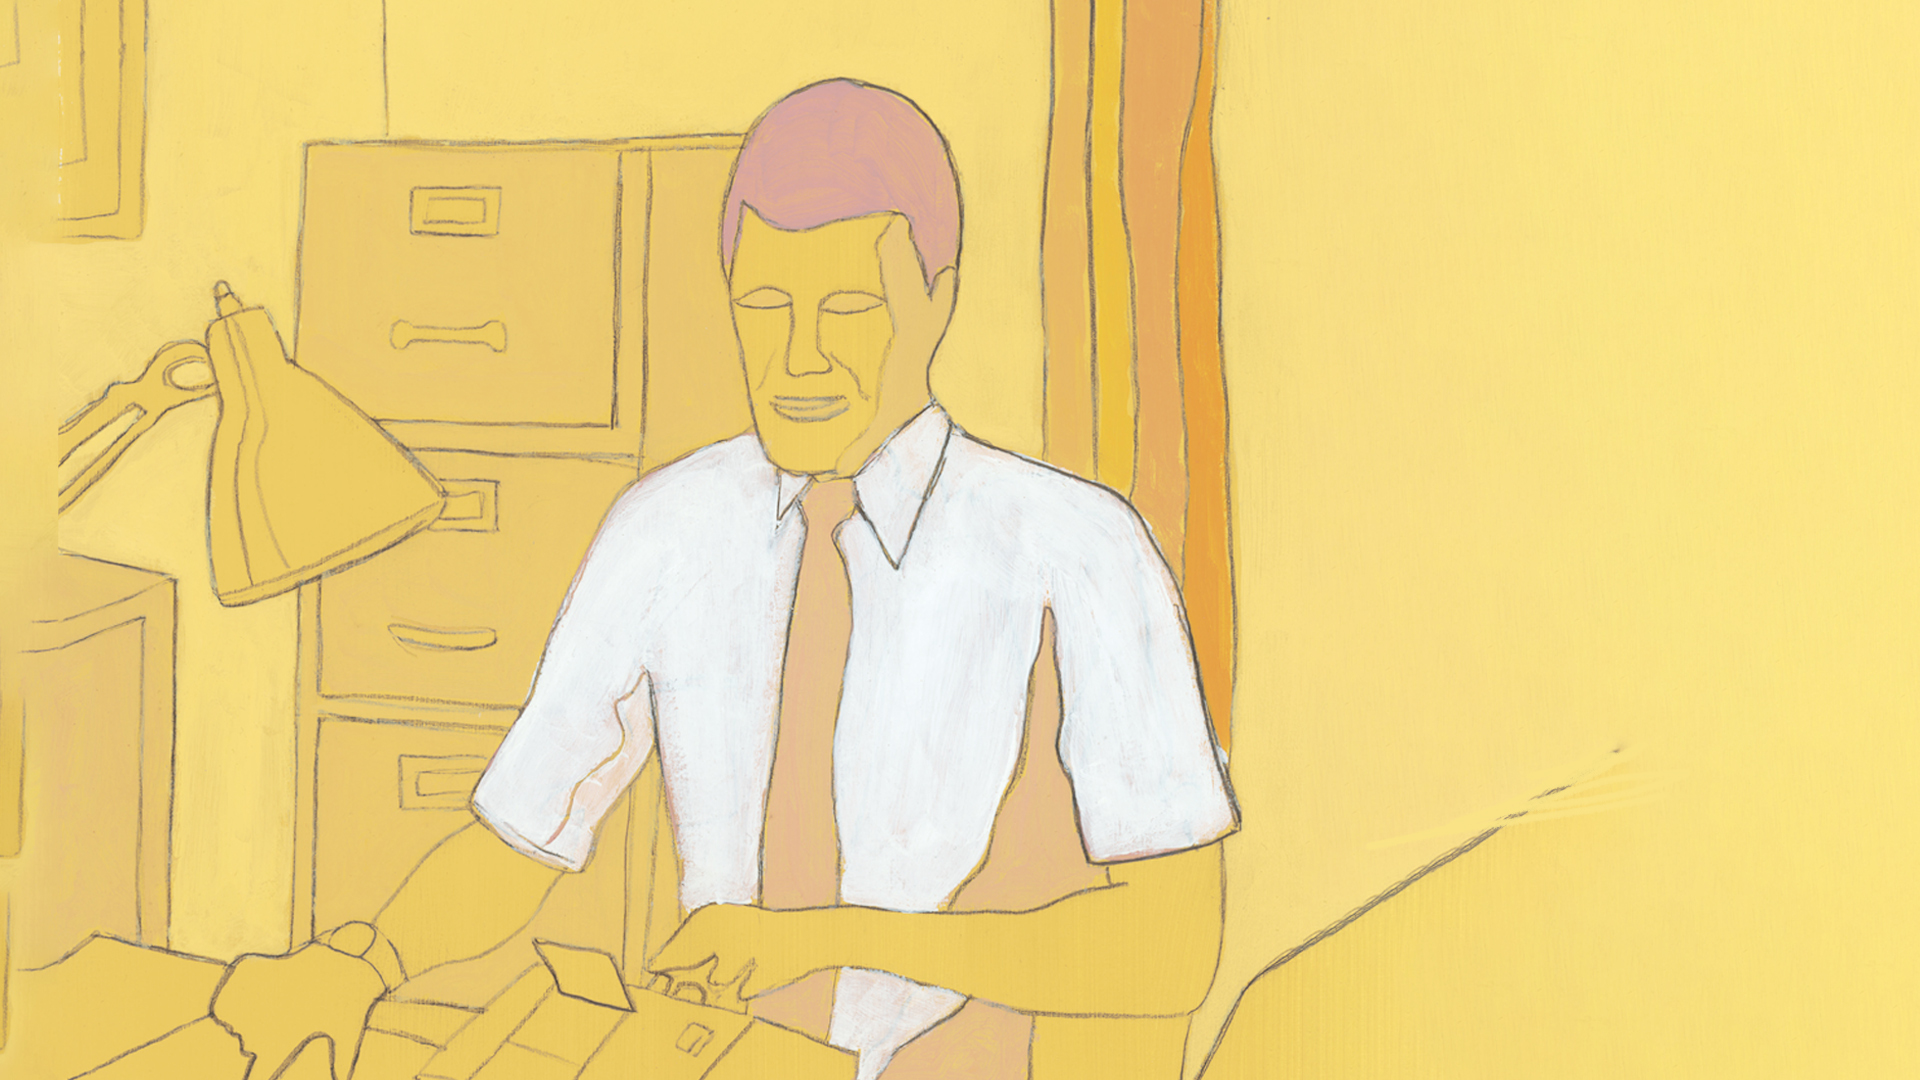 Illustration of an office worker wearing a collared shirt and tie while sitting at a desk.